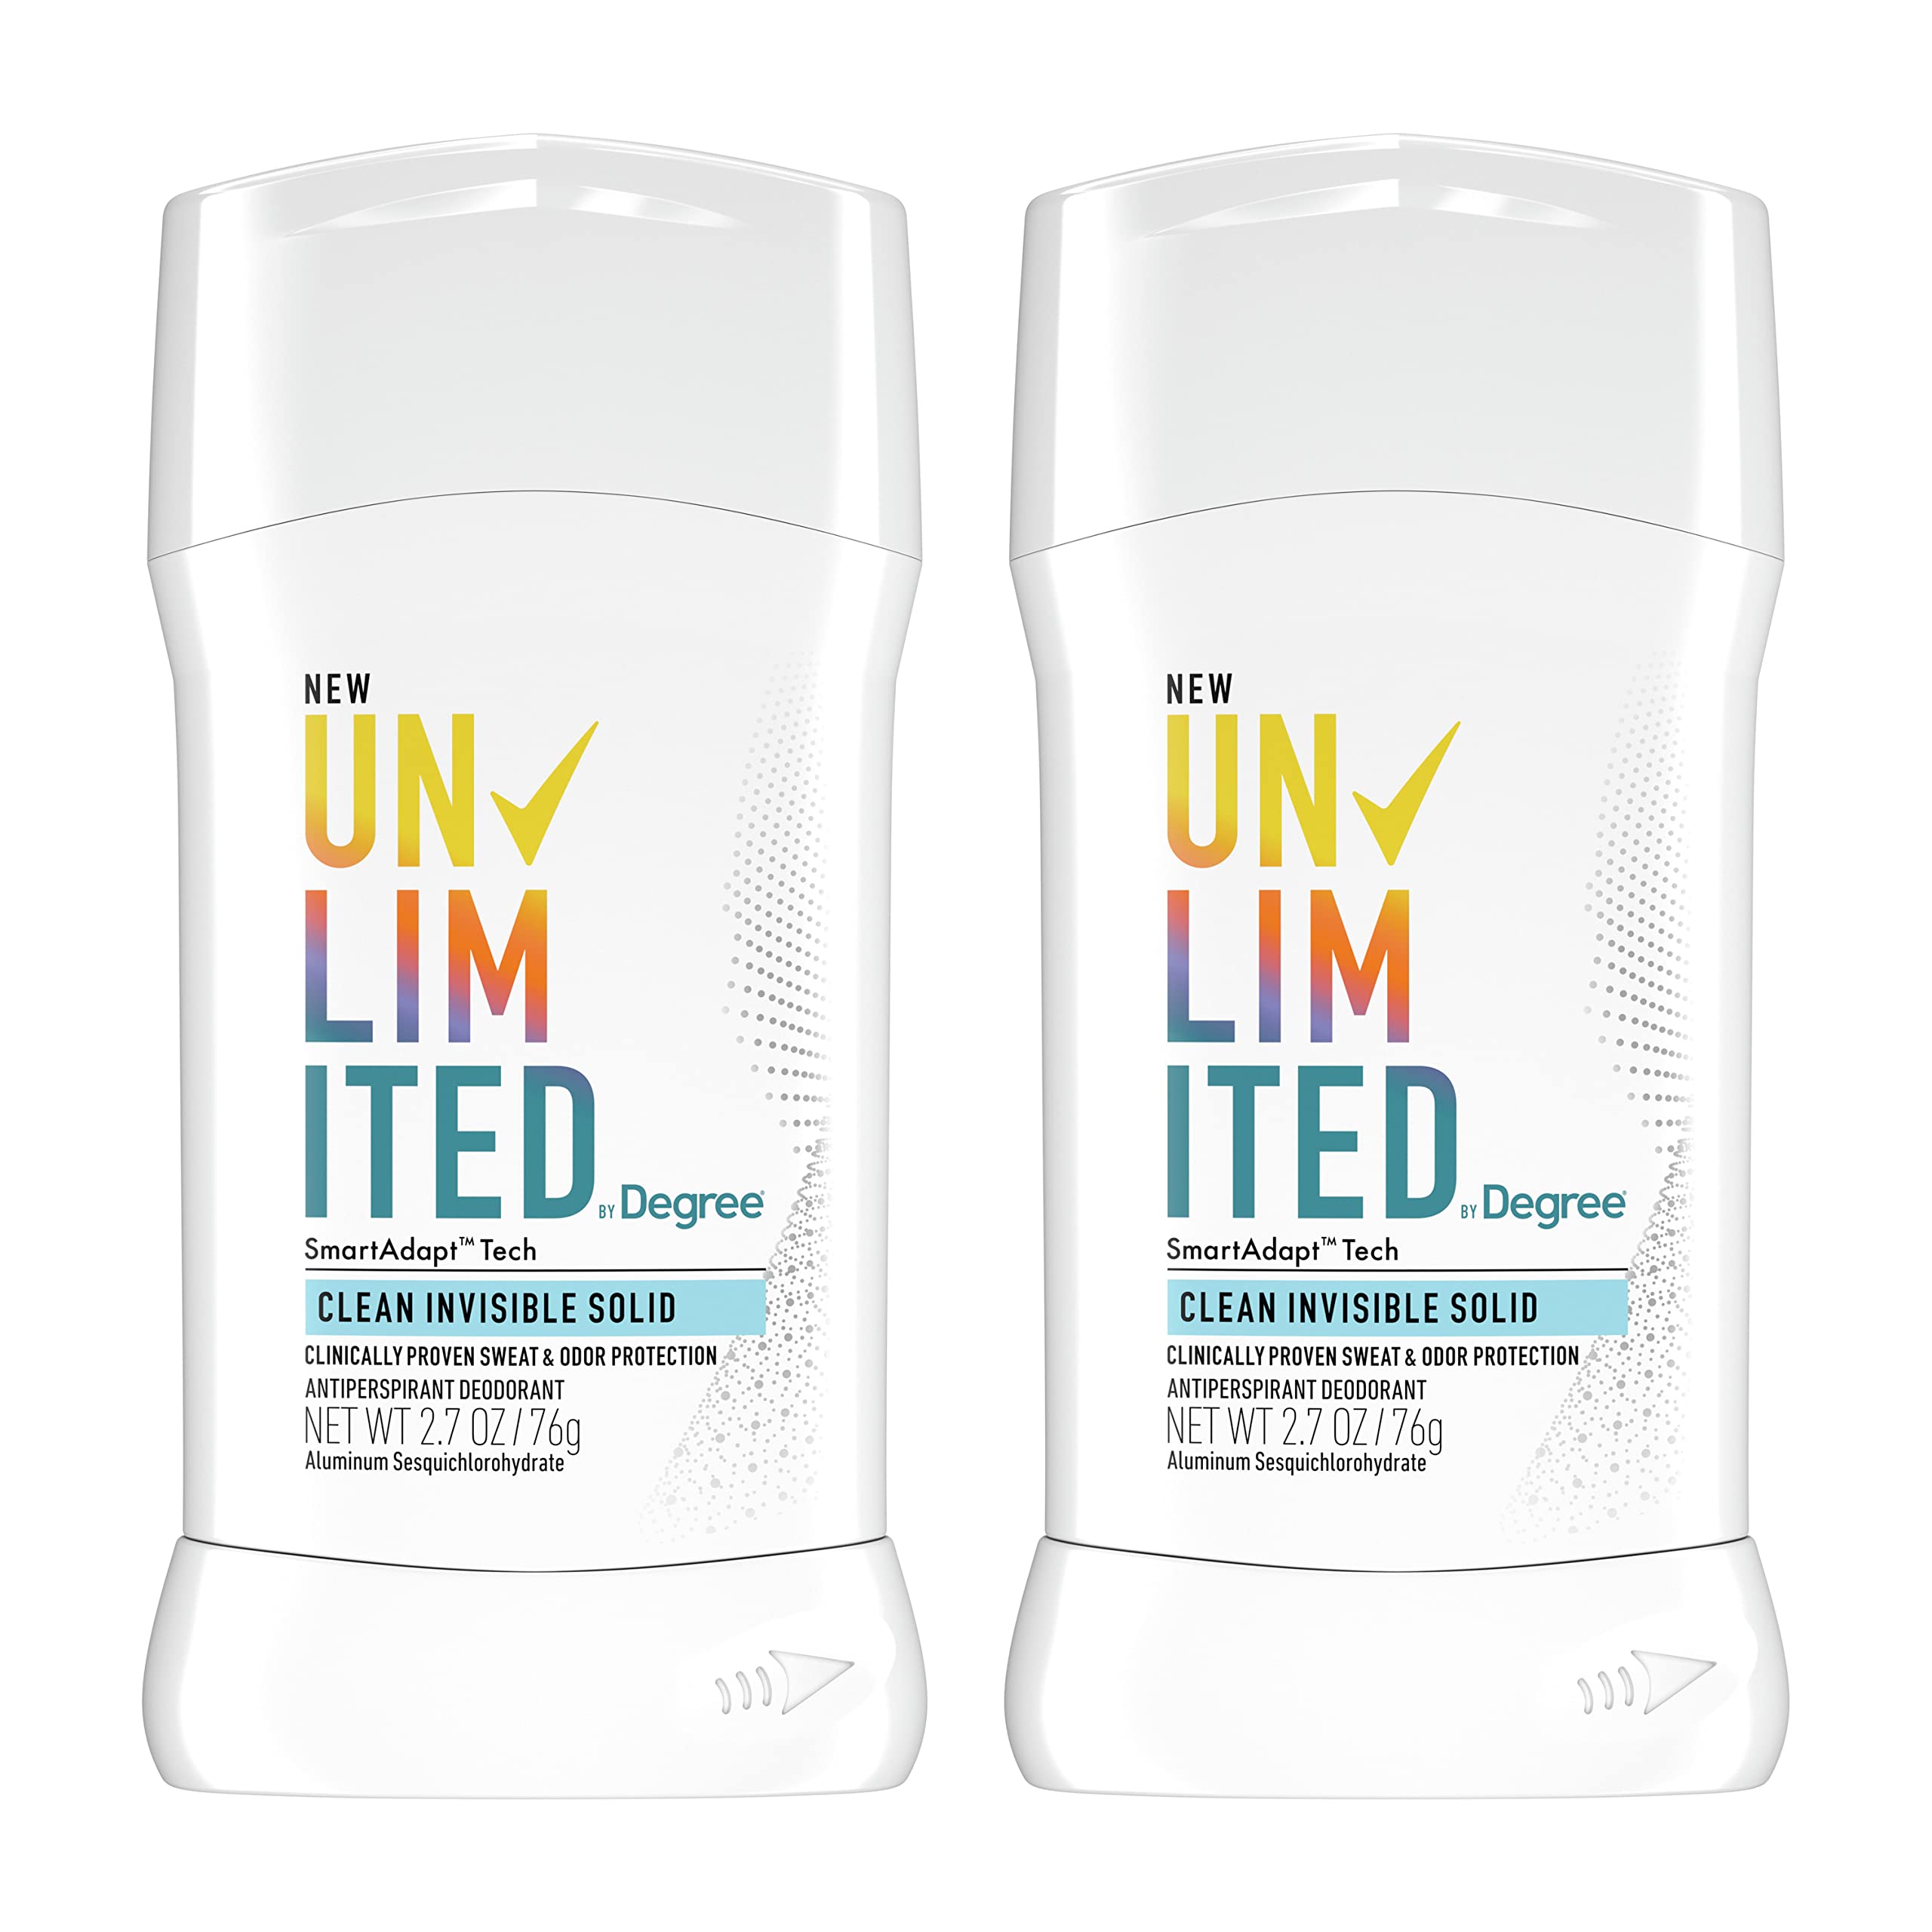 Degree Unlimited Antiperspirant Deodorant Stick Clean 2 Count Long-Lasting Sweat & Odor Protection with Antiperspirant Technology SmartAdapt Tech 2.7 oz